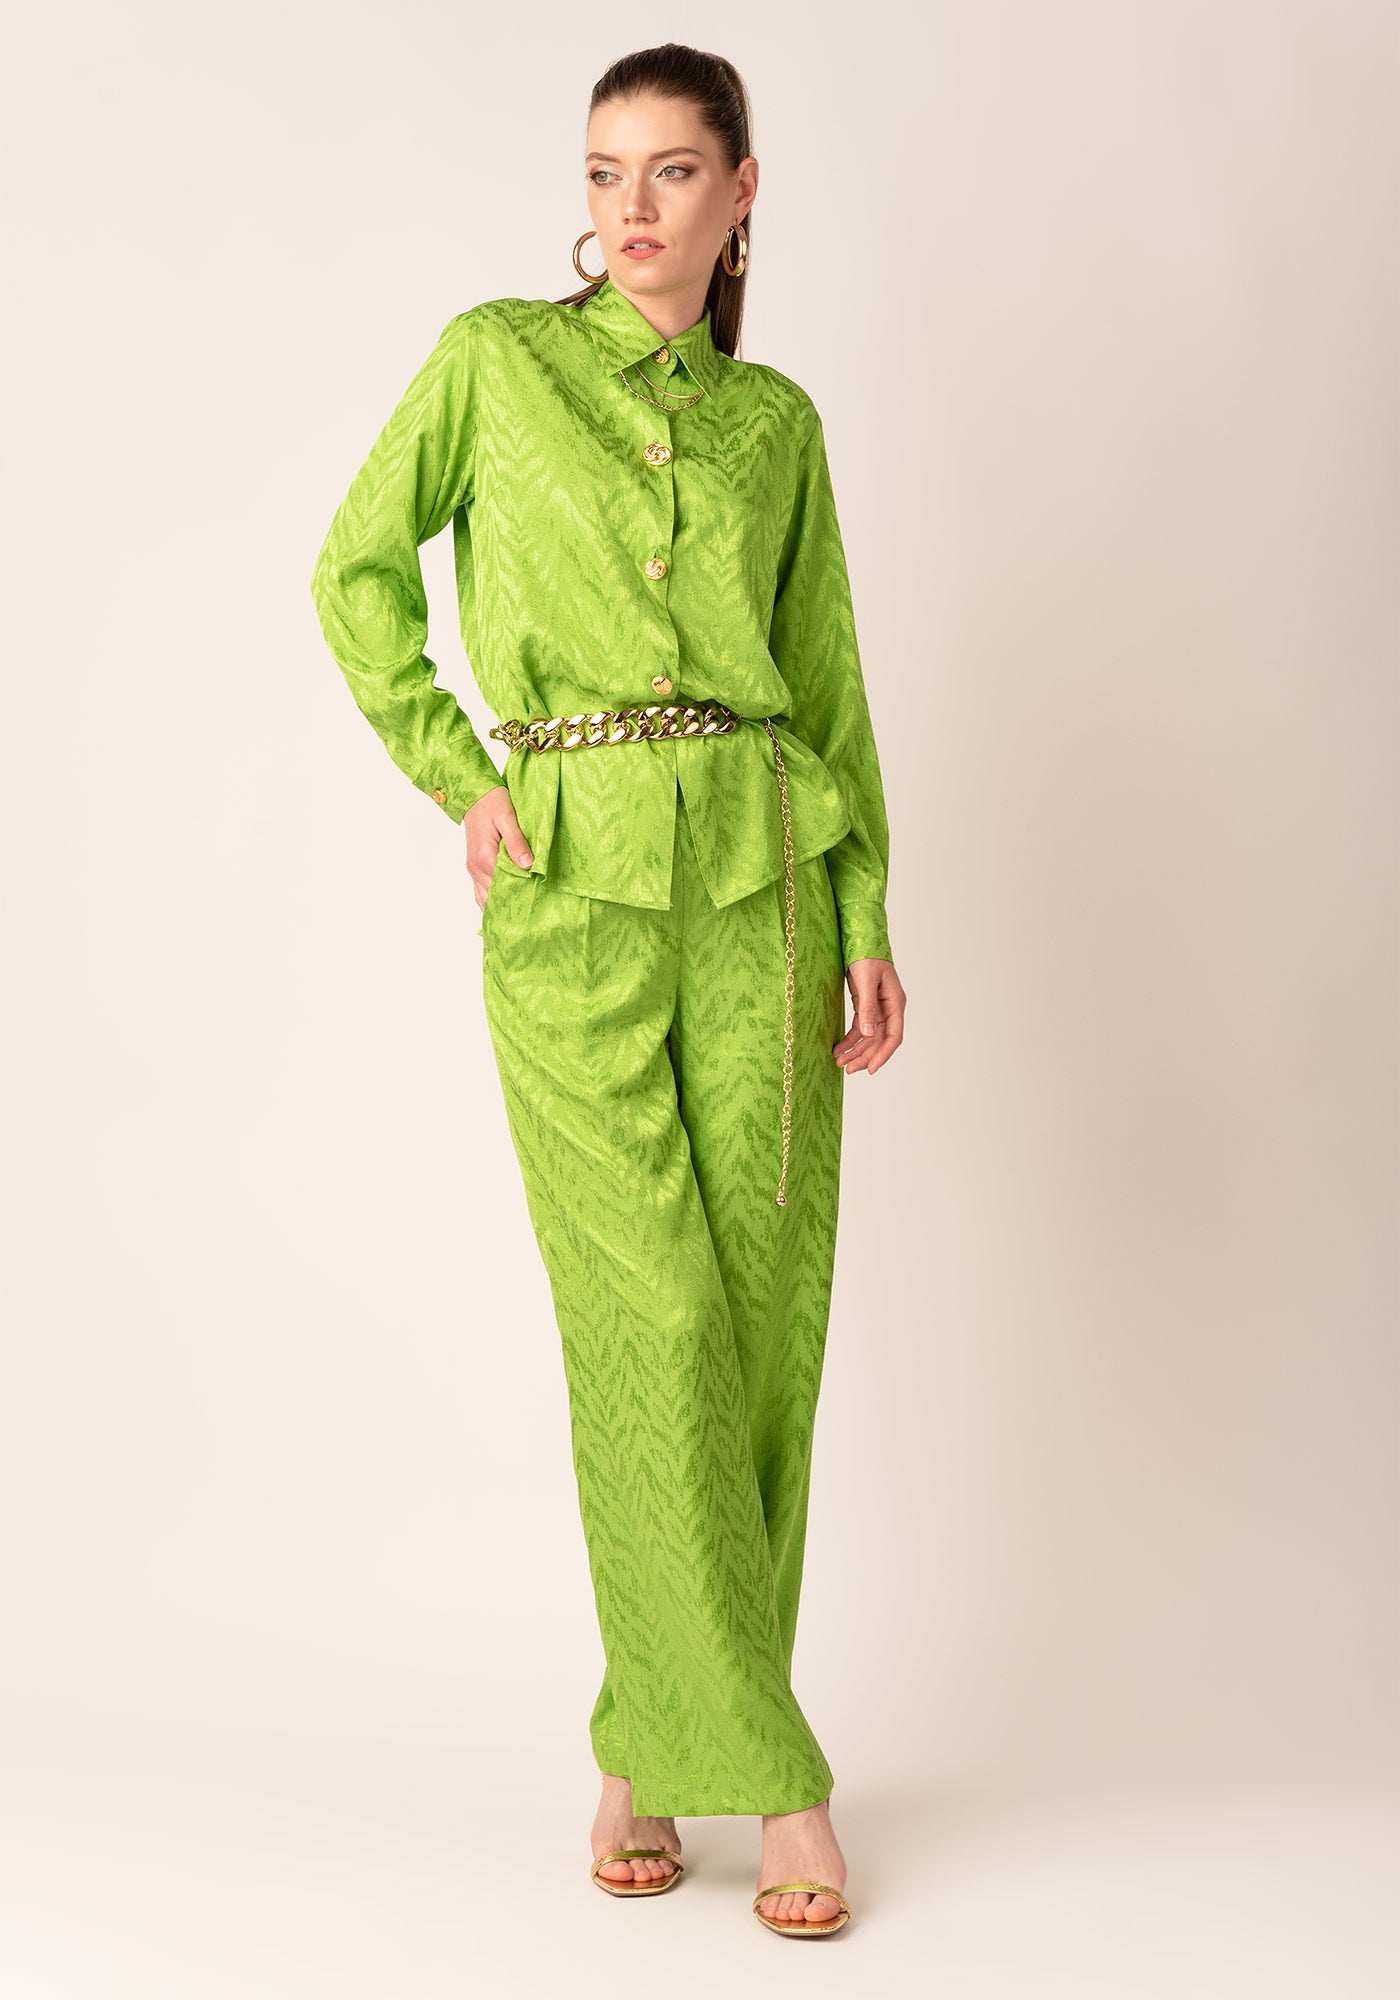 Women's Elegant Relaxed Shirt with Gold buttons in Apple Green